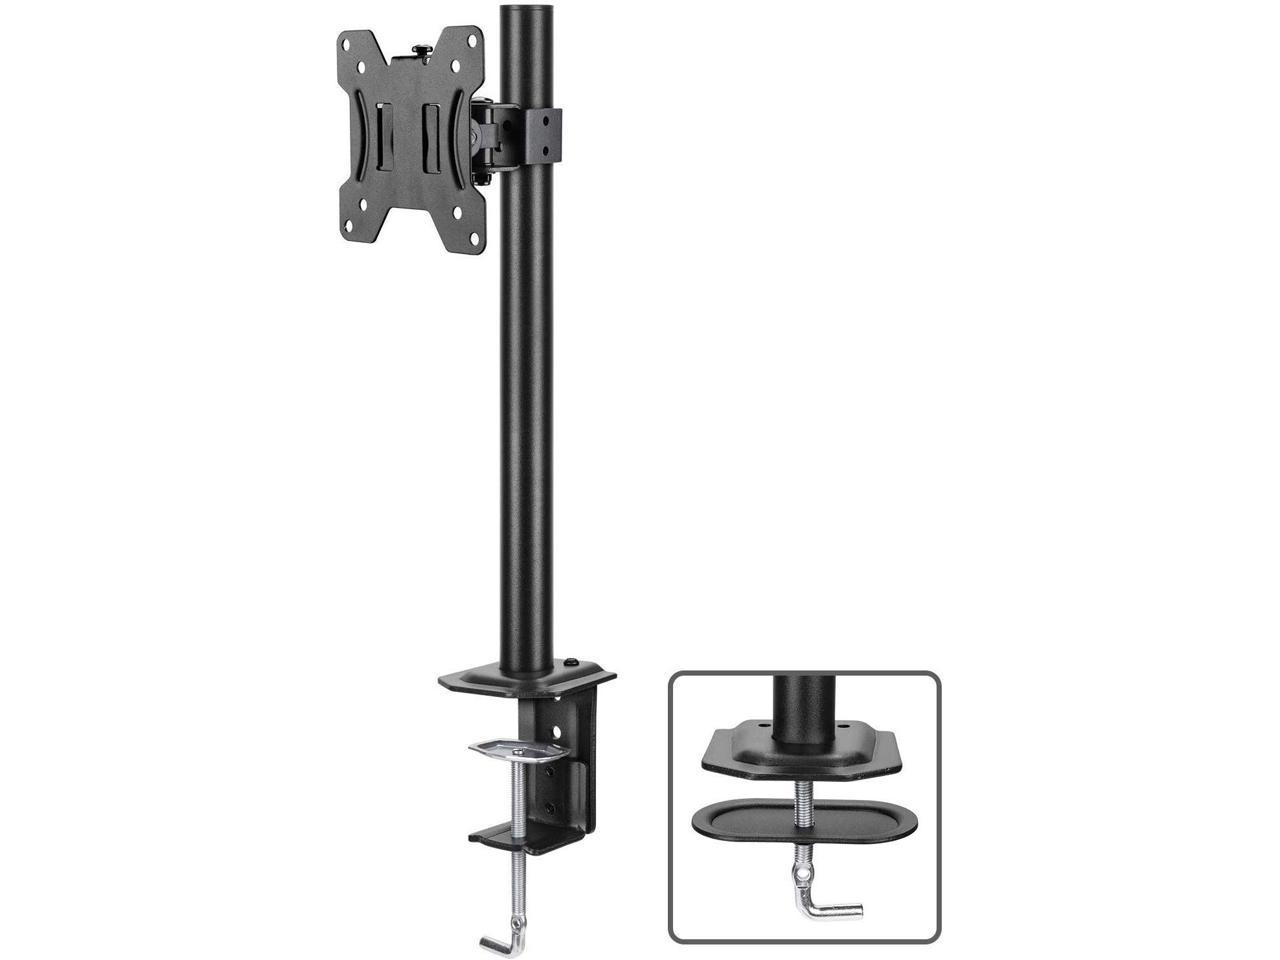 Swivel Rotation Free Standing Full Motion Desk Mount Riser fits 13 to 32 inch Screens with Adjustable Height Tilt HUANUO Single Monitor Stand 